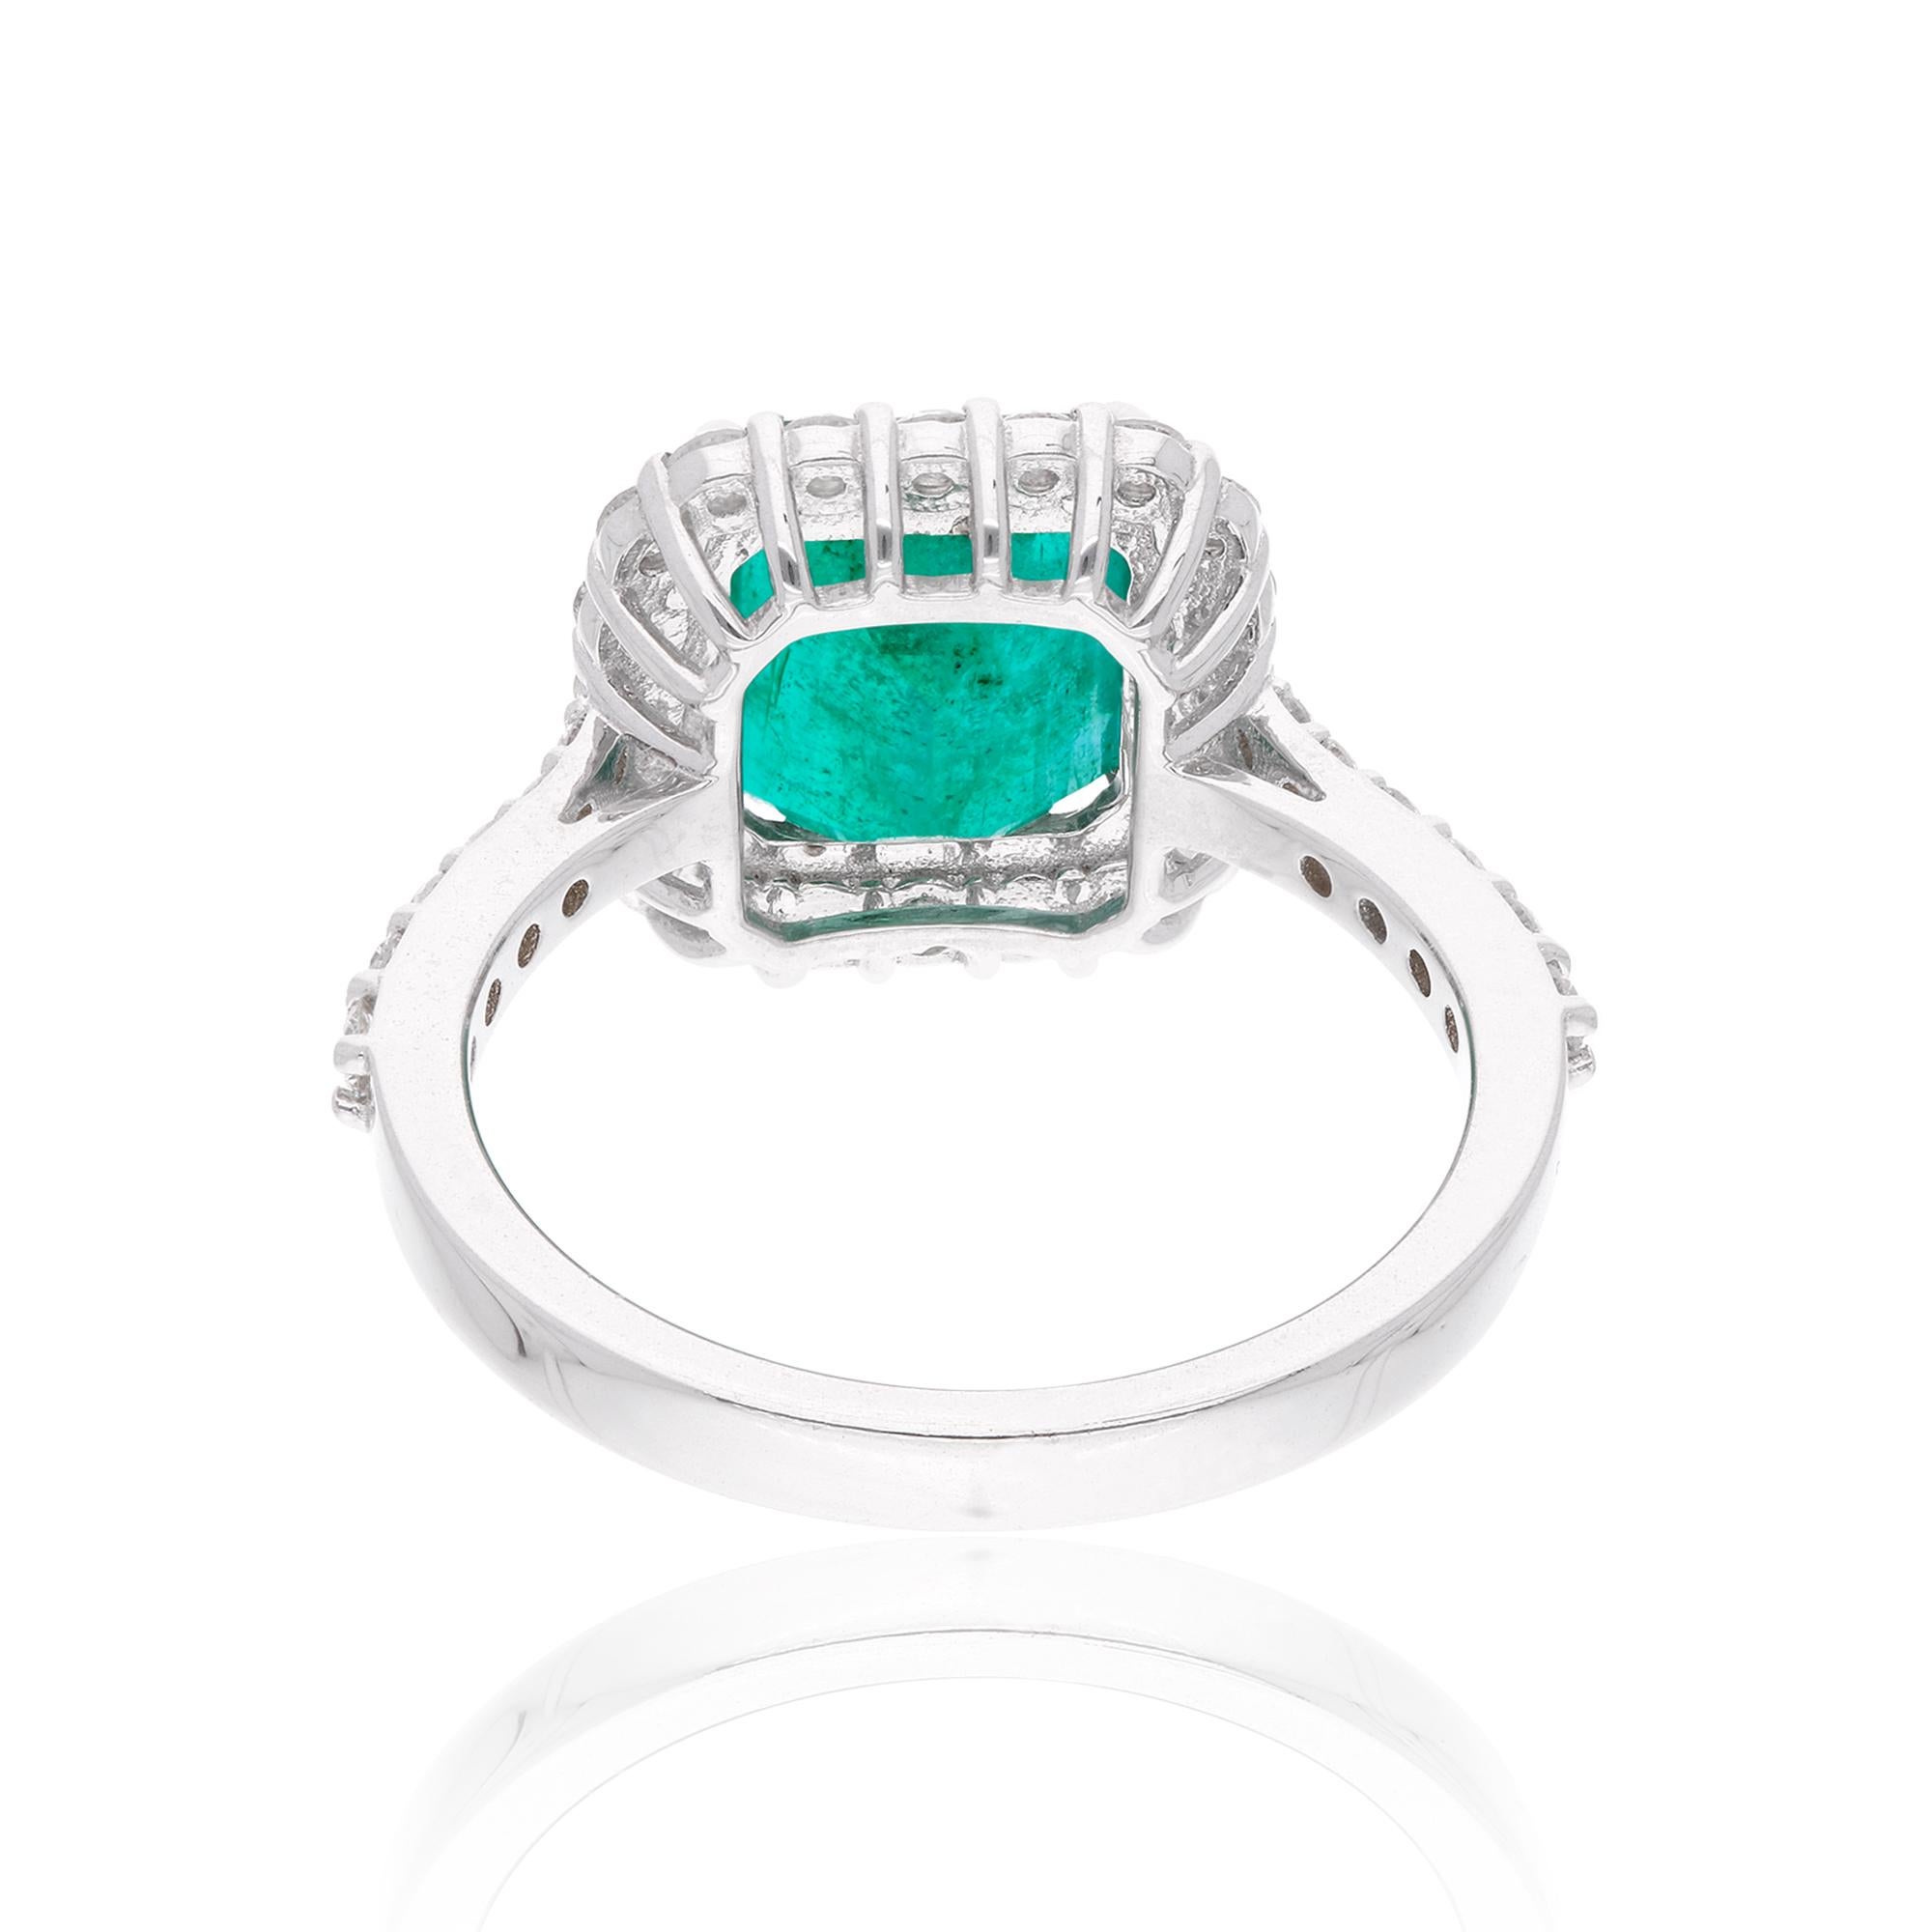 Looking for the perfect ring that will take your breath away? Look no further than this stunning Emerald Diamond Ring from our collection. Crafted with care and precision, this ring features a brilliant Emerald-cut Emerald that is sure to catch the